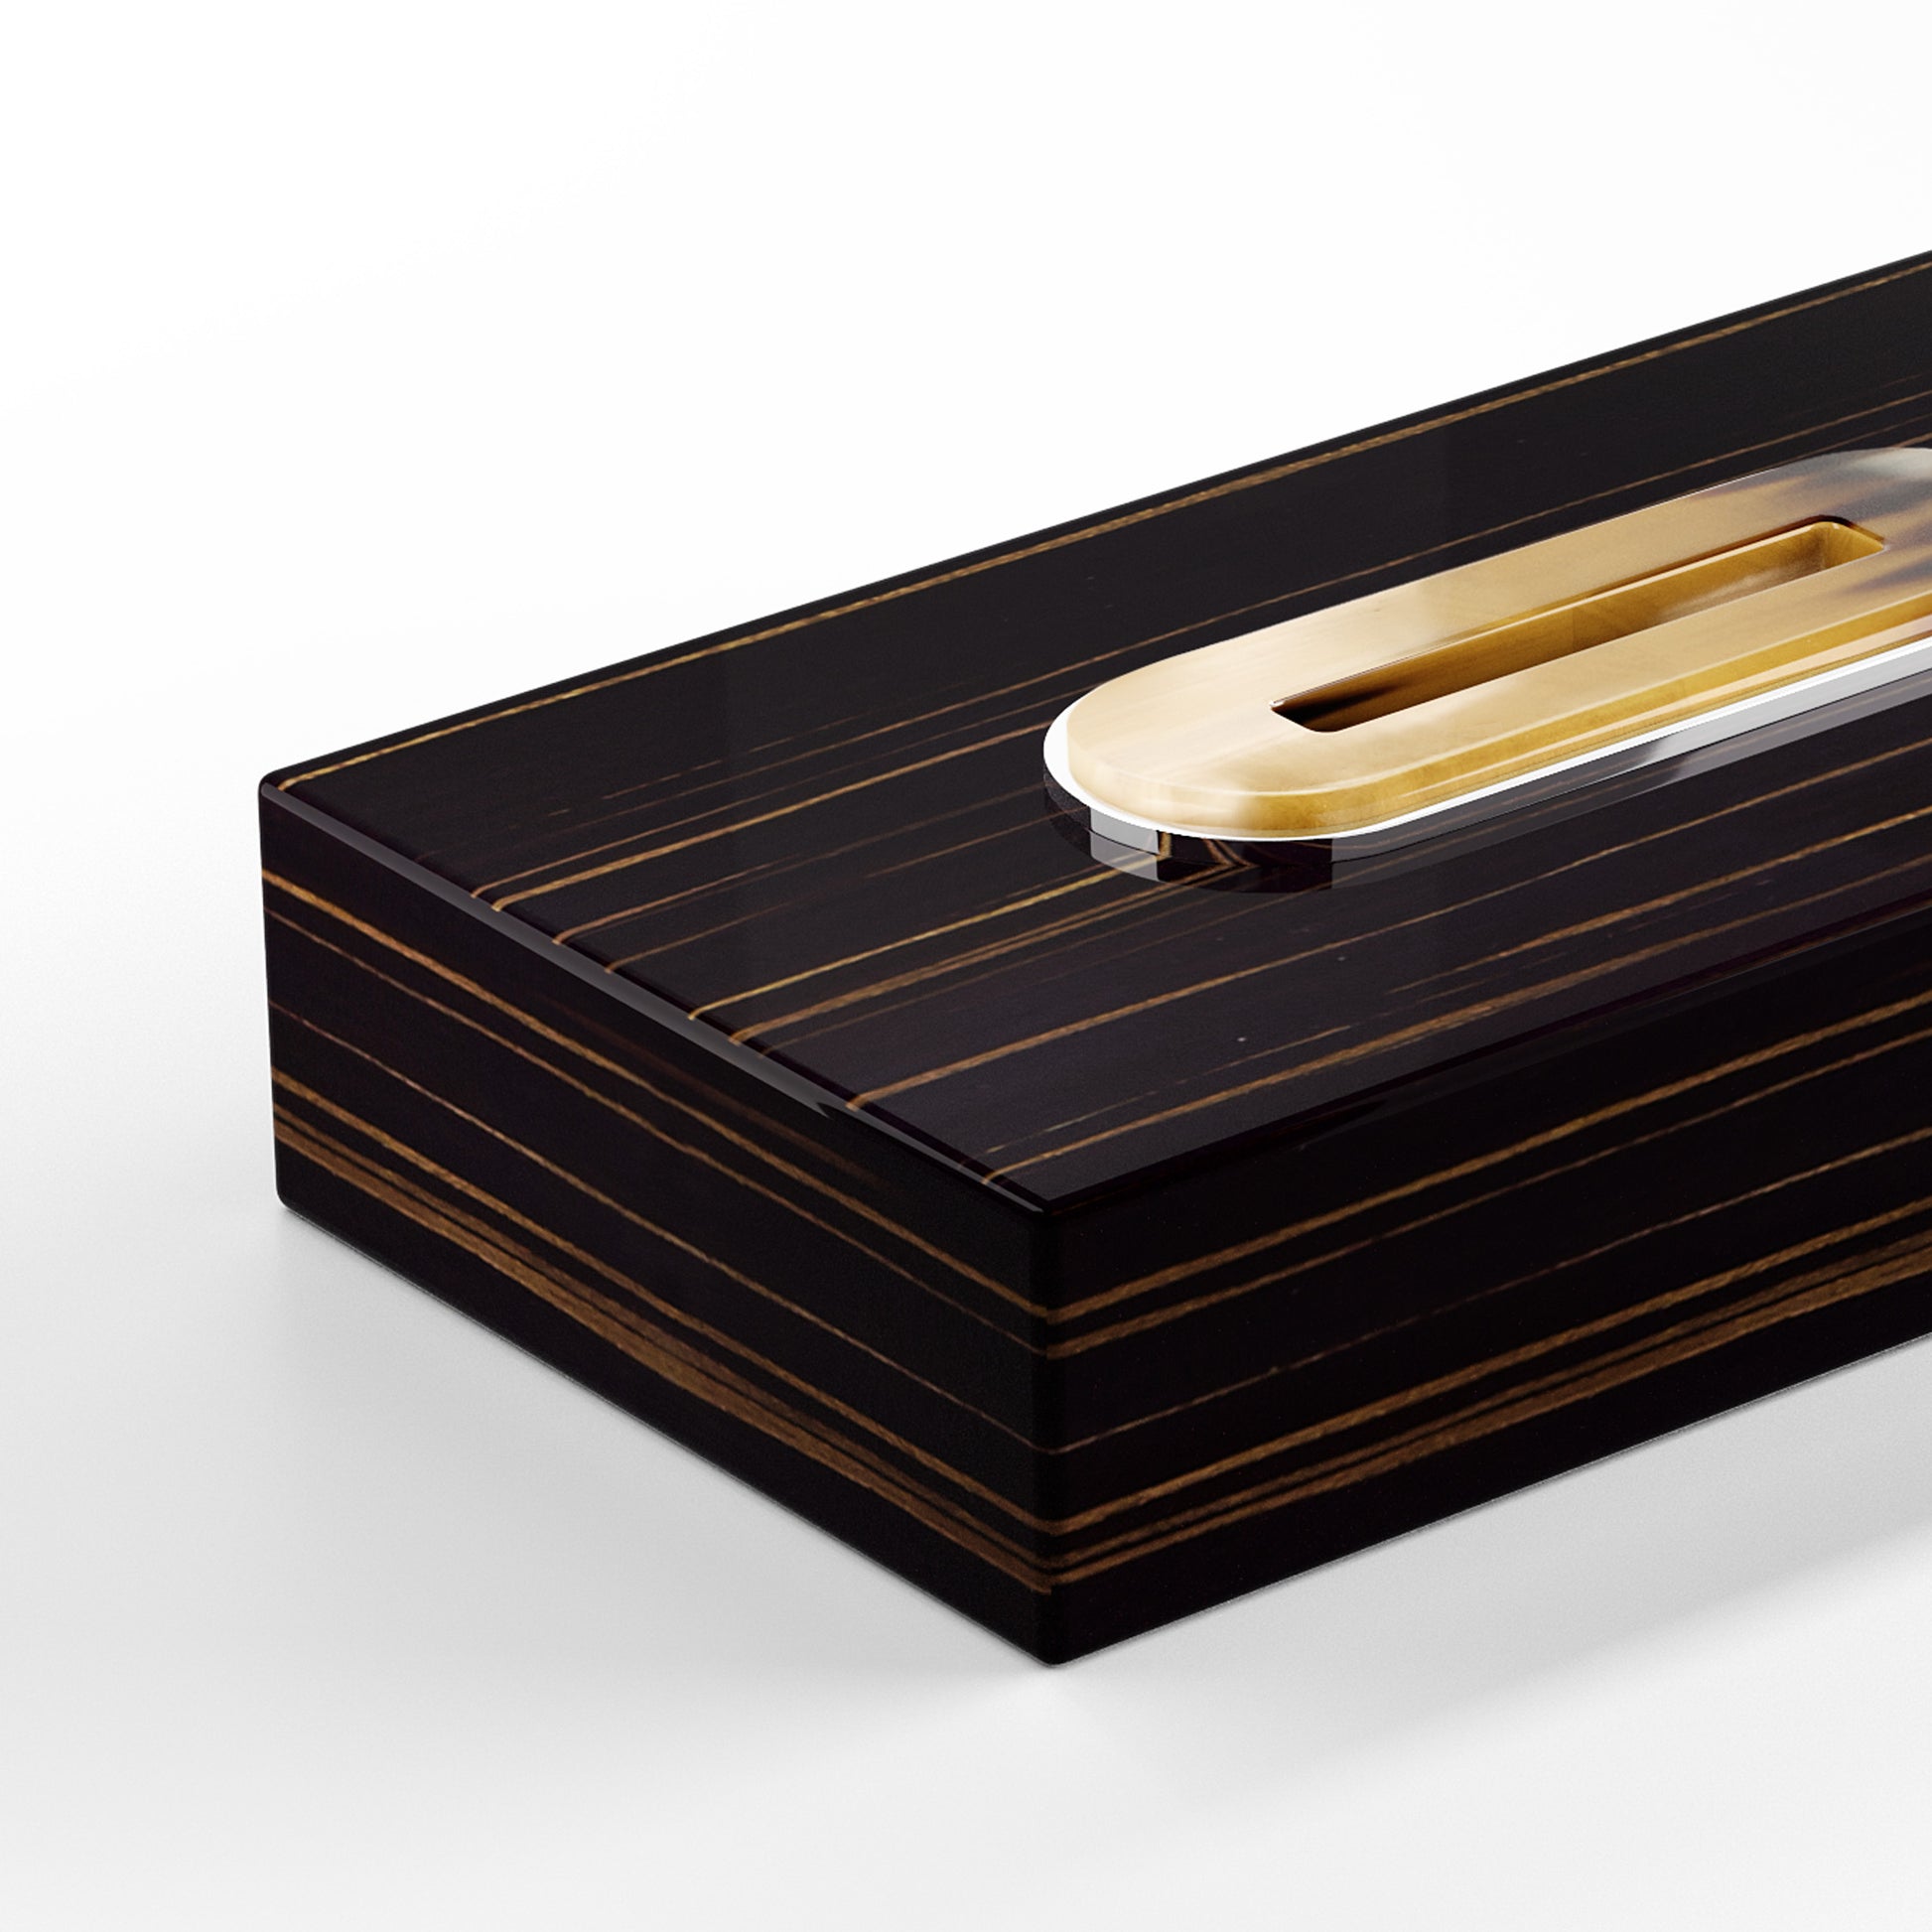 Arcahorn Veletta Tissue Box | Glossy Ebony Finish | Horn and Chromed Brass Detail | Elegant Tissue Box Holder | Explore a Range of Luxury Home Accessories at 2Jour Concierge, #1 luxury high-end gift & lifestyle shop